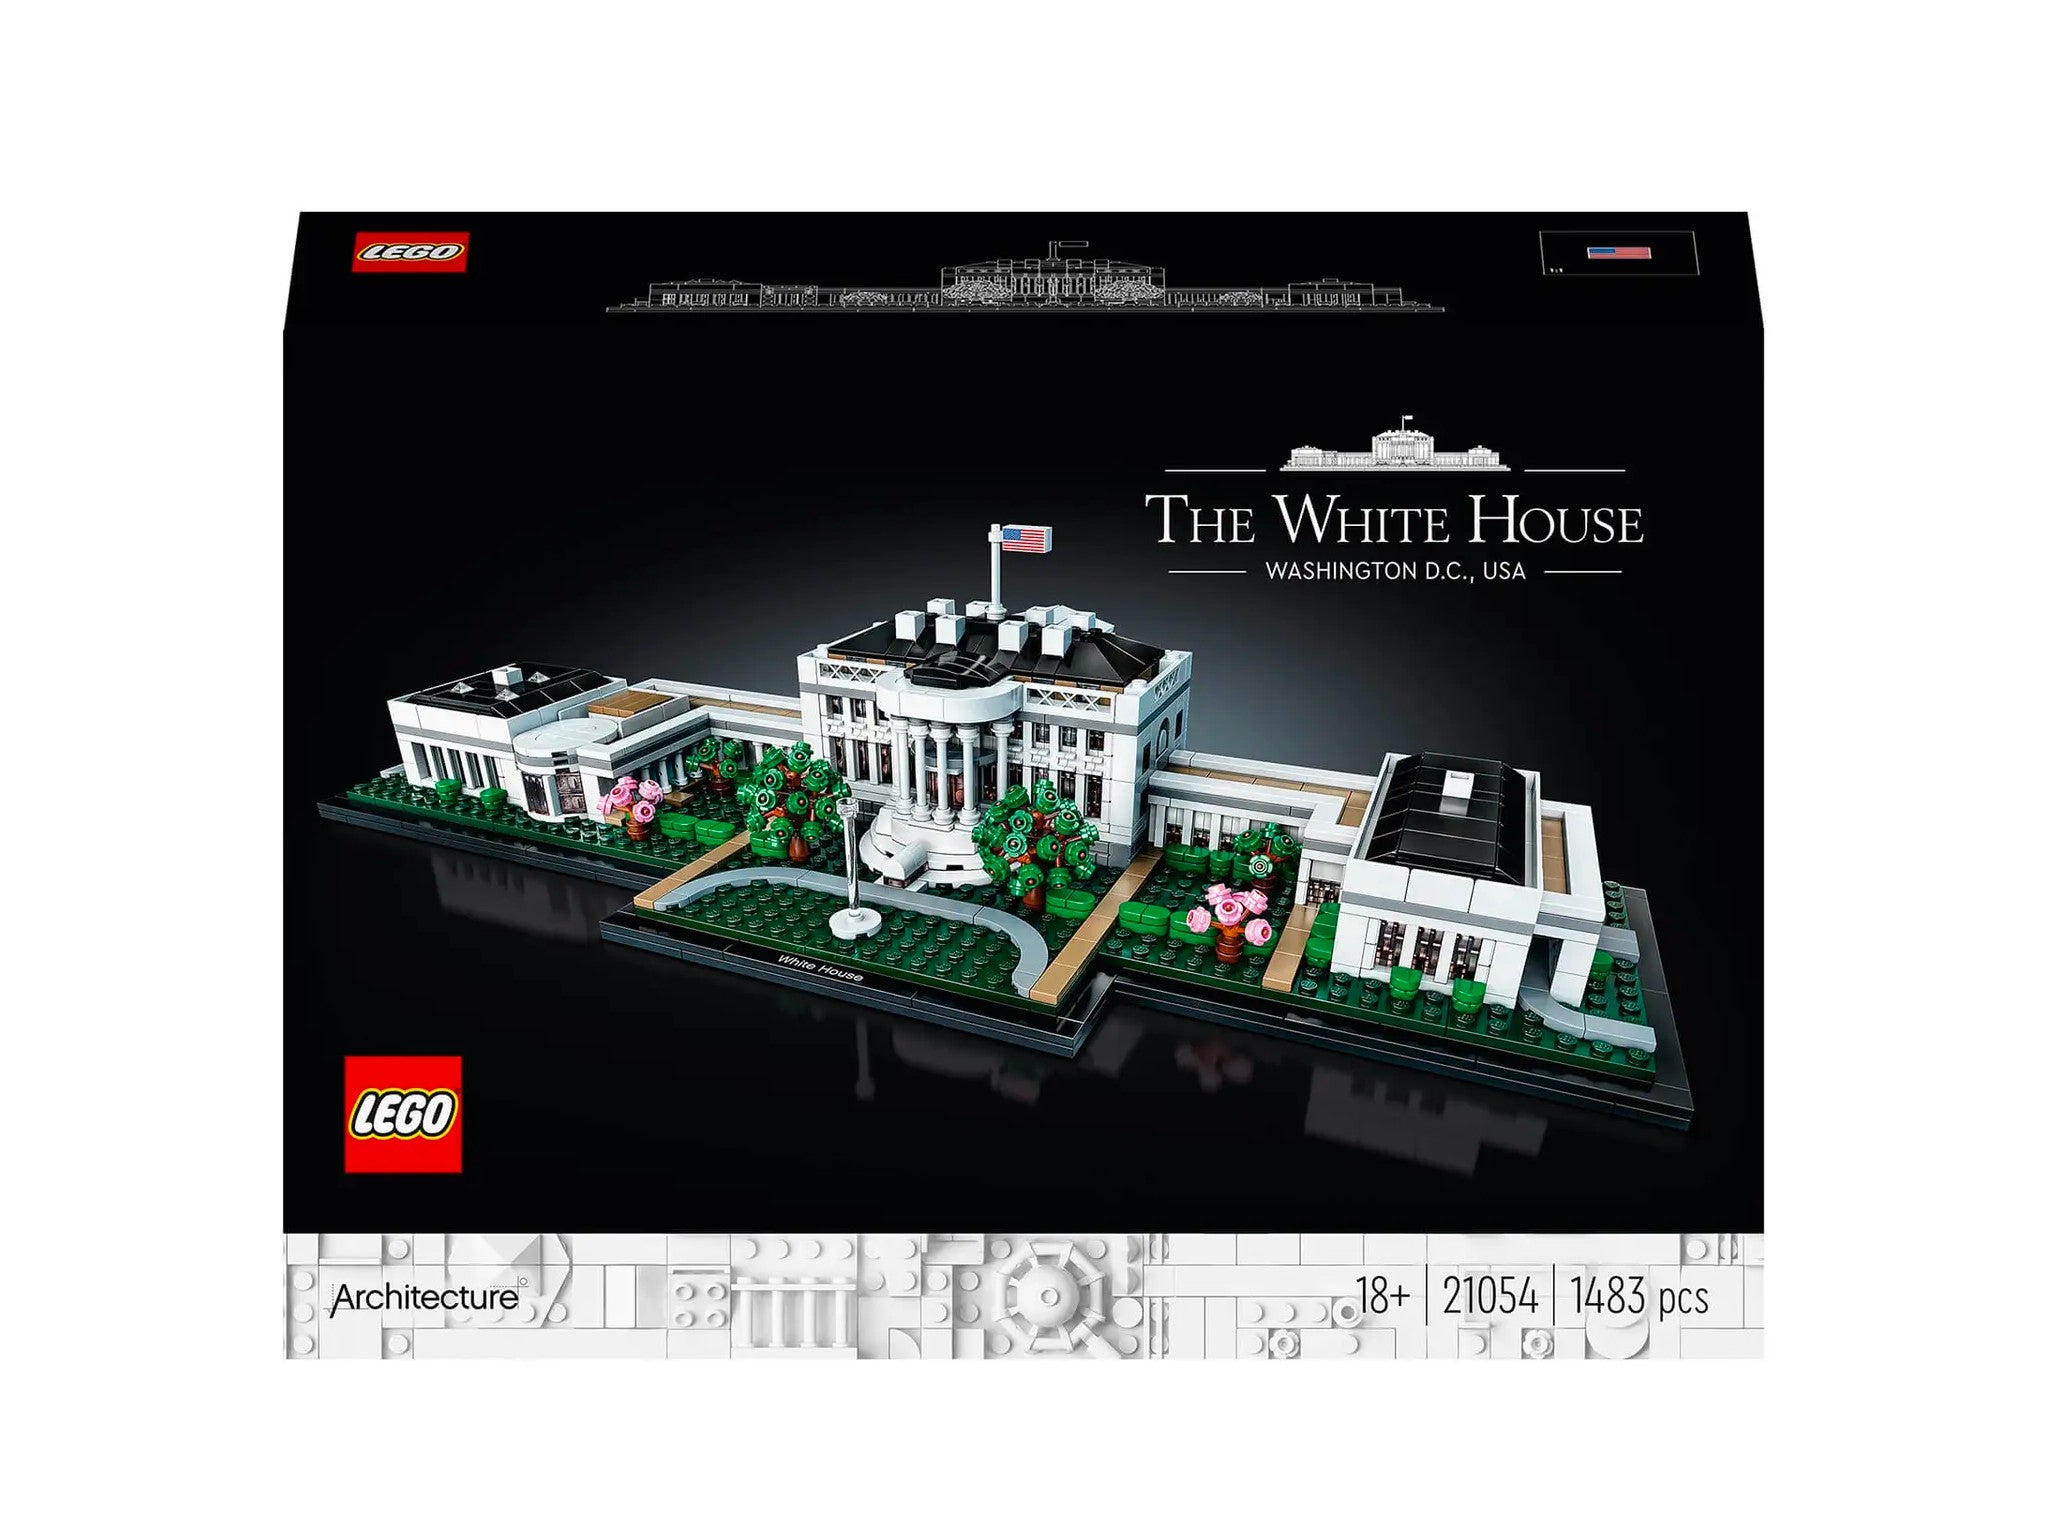 Lego Architecture The White House display model indybest.jpg